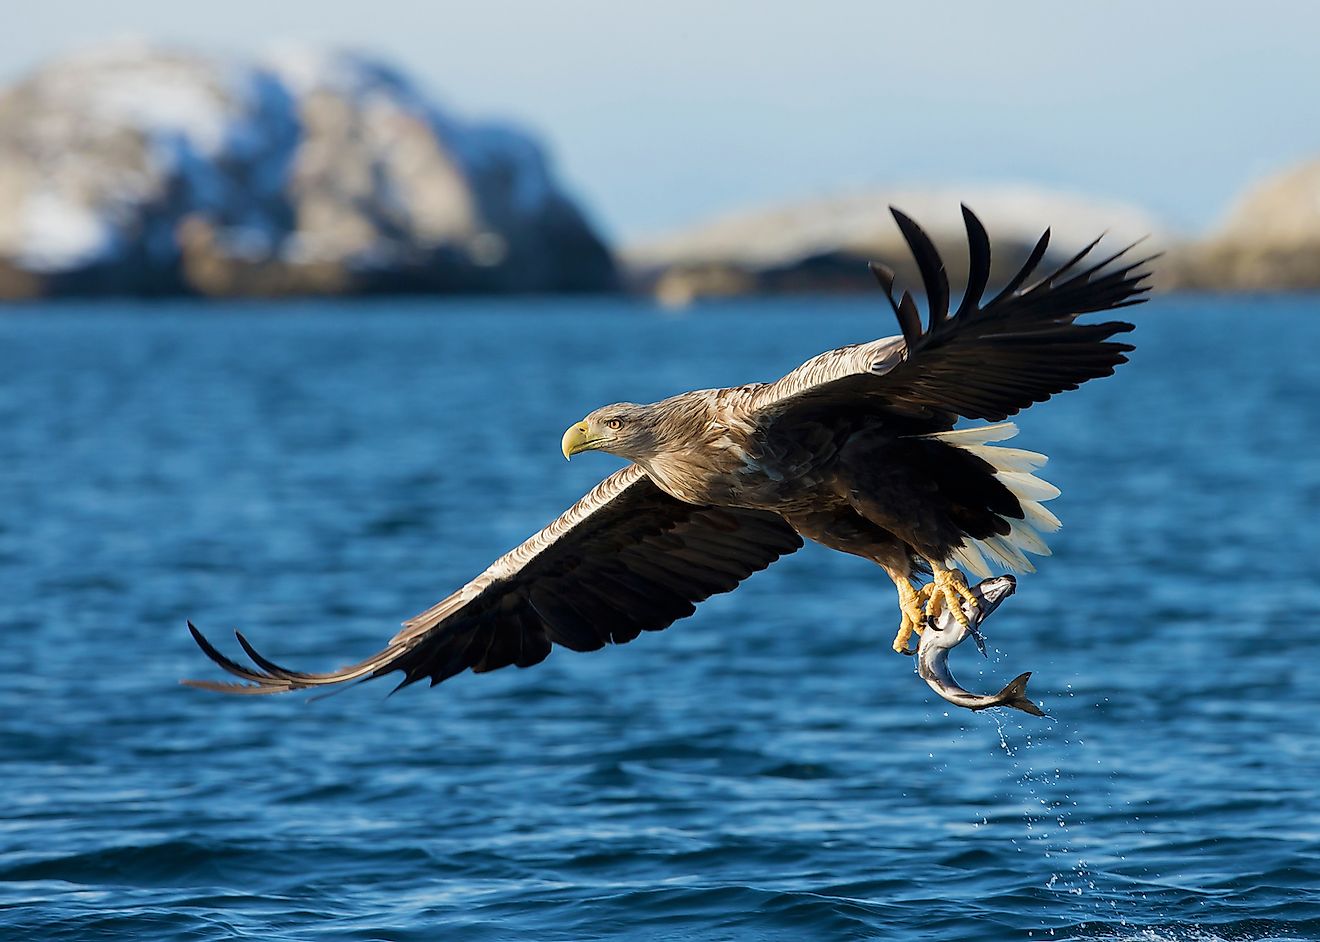 White-tailed sea Eagle (Haliaeetus albicilla), catching a fish, Norway. Image credit: Giedriius/Shutterstock.com